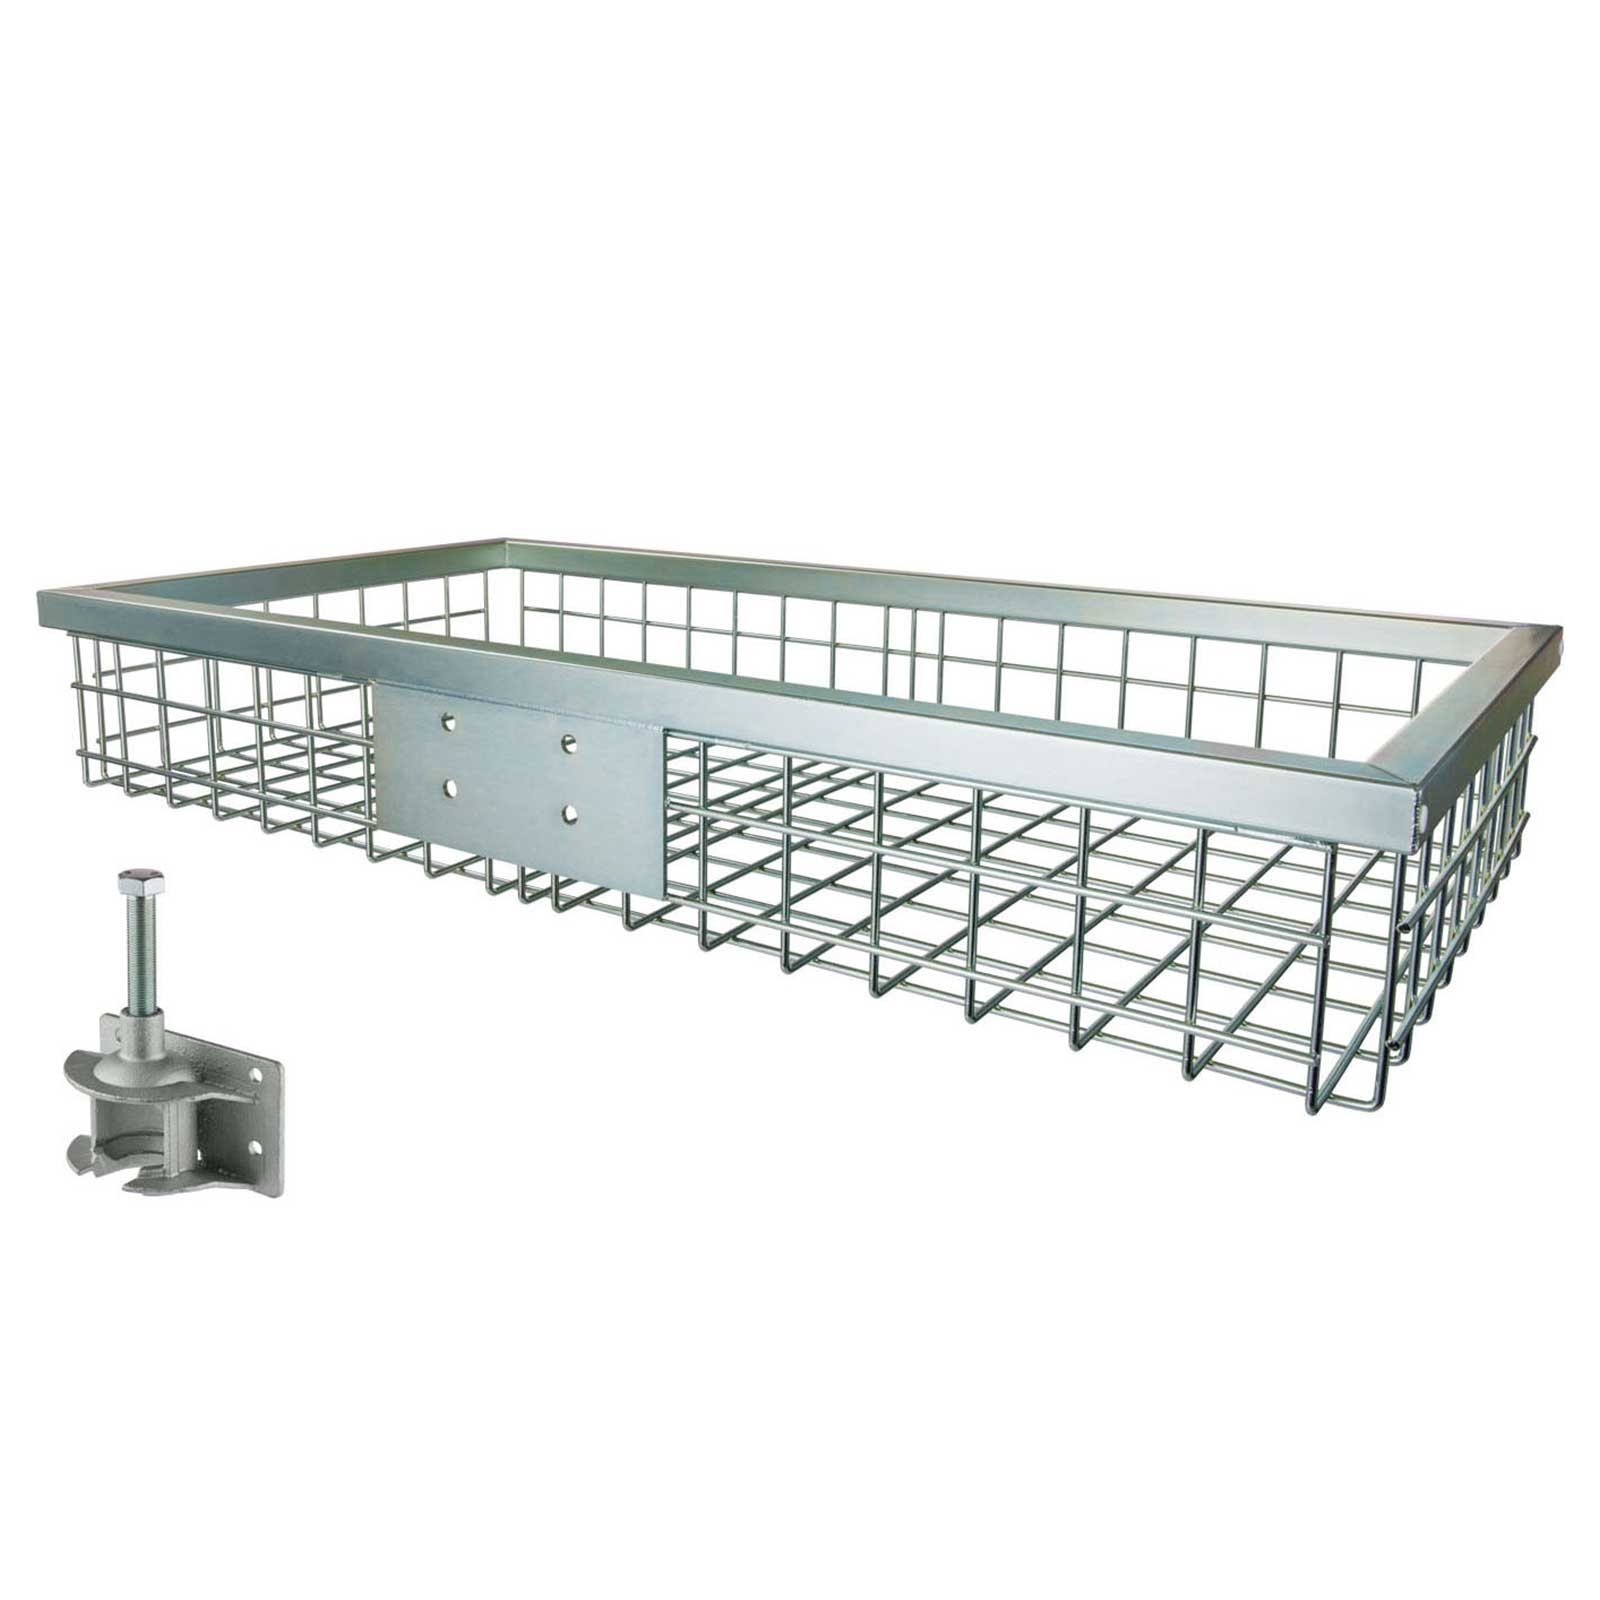 Heckräger 1020X530X165 Mm Galvanized With Plug -In Coupling